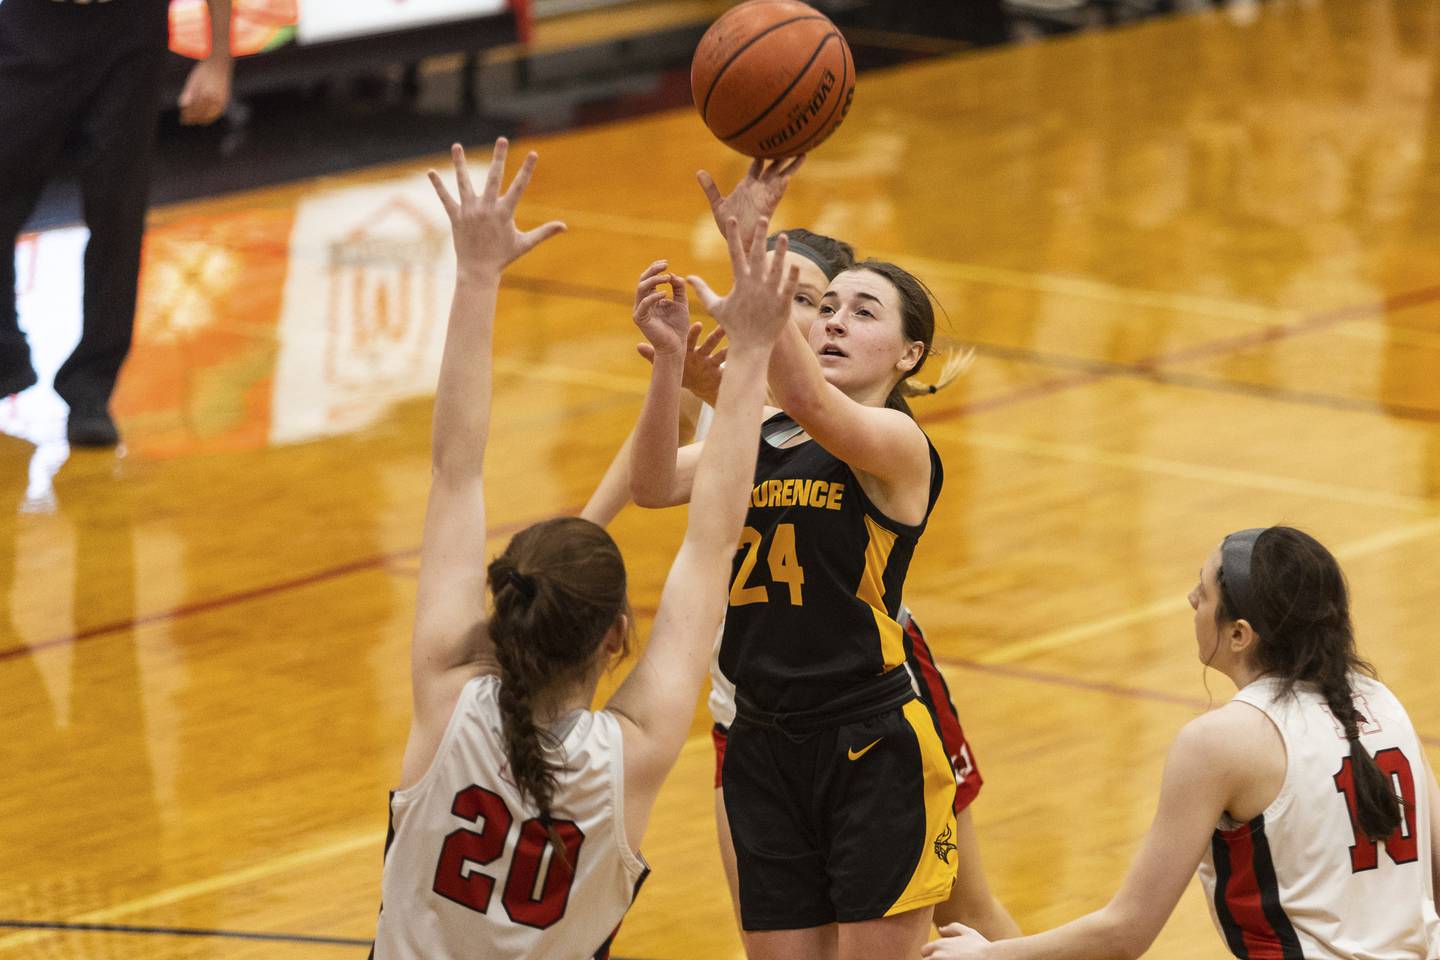 St. Laurence's Clare Allison (24) floats a shot over Marist’s Nora Brusek (20) during a nonconference game in Chicago on Monday, Dec. 19, 2022.